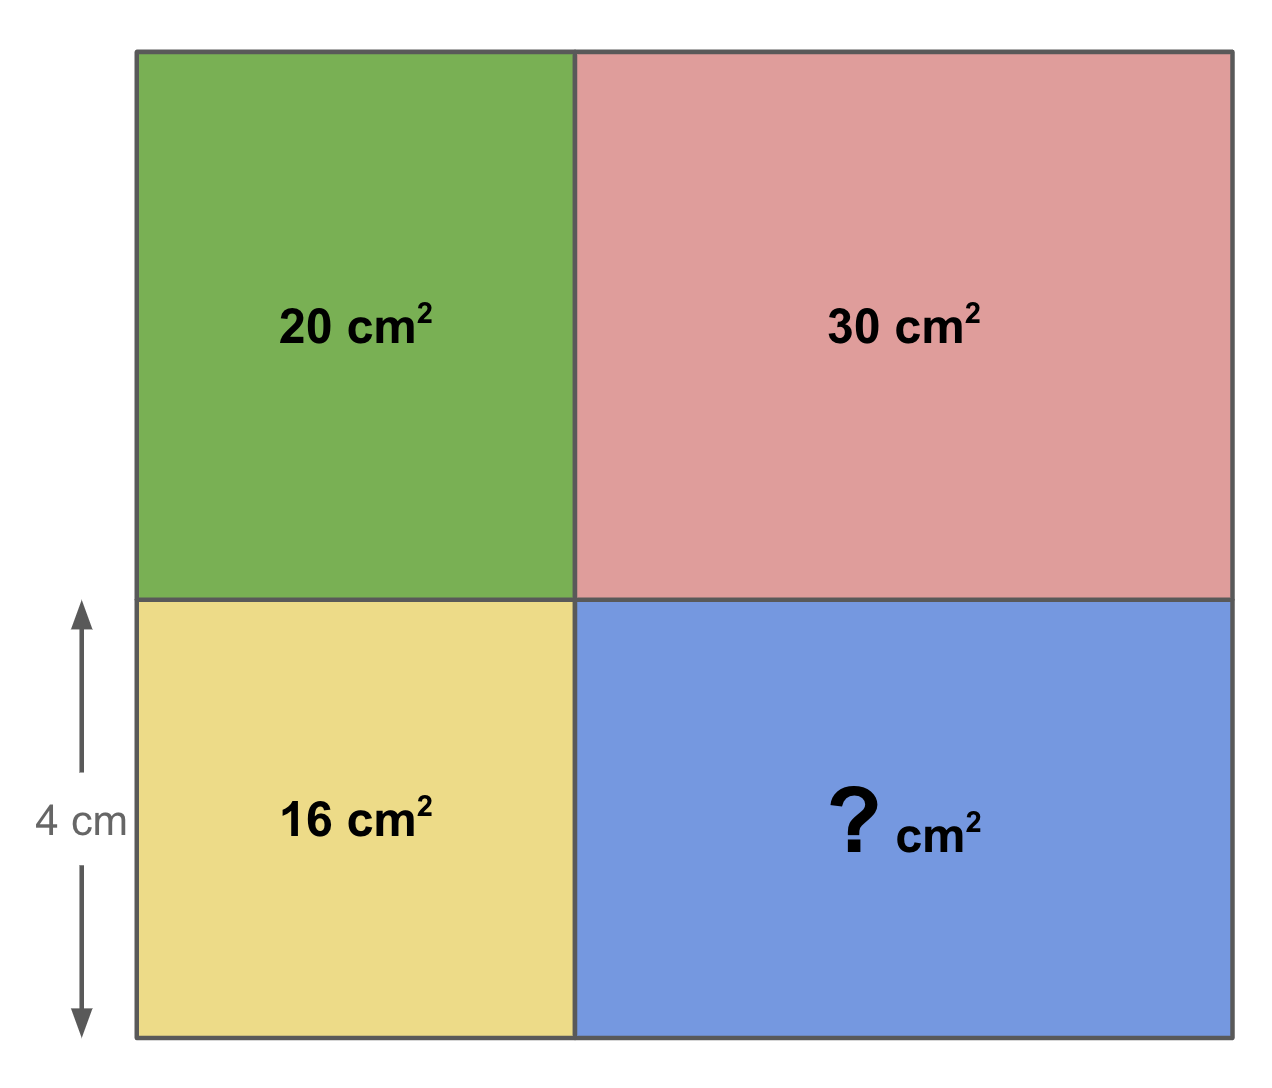 Four rectangles connected to form a larger rectangle. A green rectangle in the upper left corner has a labelled area of 20 square cm and shares its right side with the red rectangle and its bottom side with the yellow square (all side lengths unlabelled.) To its right is a red rectangle in the upper right corner with a labelled area of 30 square cm. It shares its left side with the green rectangle, and its bottom side with the blue rectangle (all side lengths unlabelled.) The yellow square in the bottom left corner has a labelled area of 16 square cm and shares its top side with the green rectangle and its right side with the blue rectangle. Its left hand side is labelled 4 cm long. The blue rectangle in the bottom right corner has an unknown area labelled by a question mark and shares its left side with the yellow square and its top side with the red rectangle (all side lengths unlabelled.)